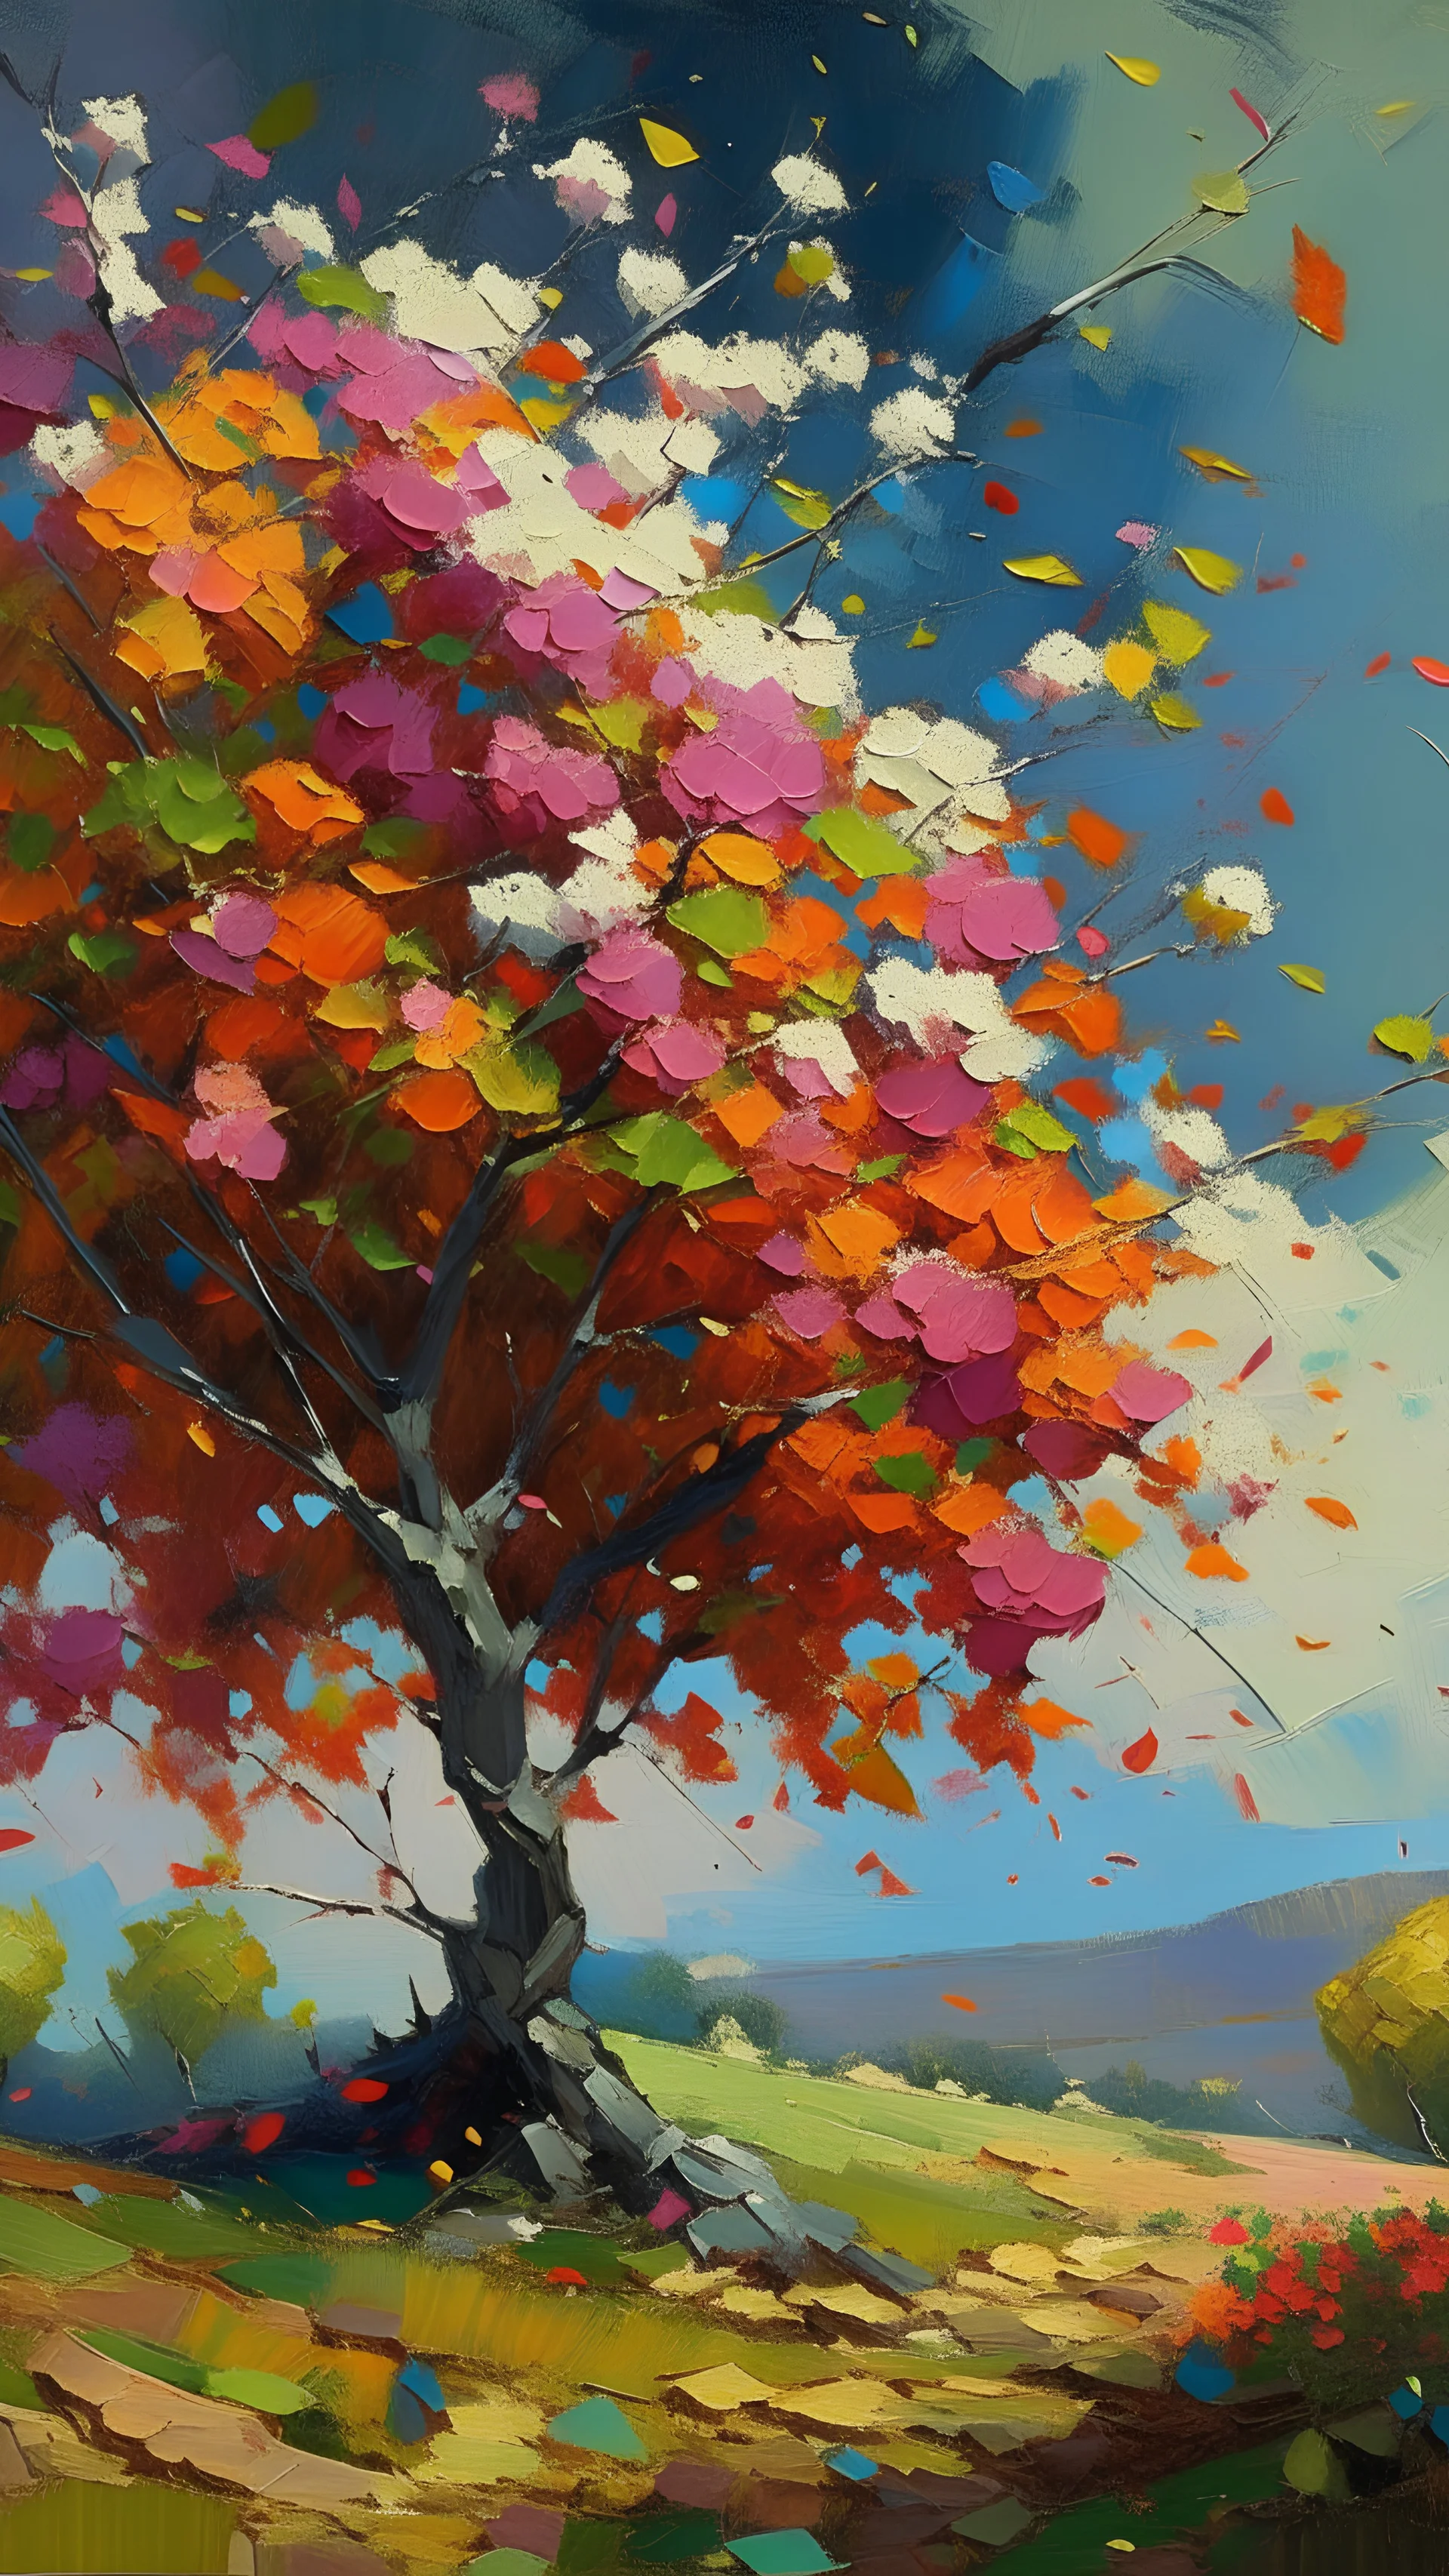 impressionism-style oil painting of beautiful flowers falling from a big tree with a view in the background